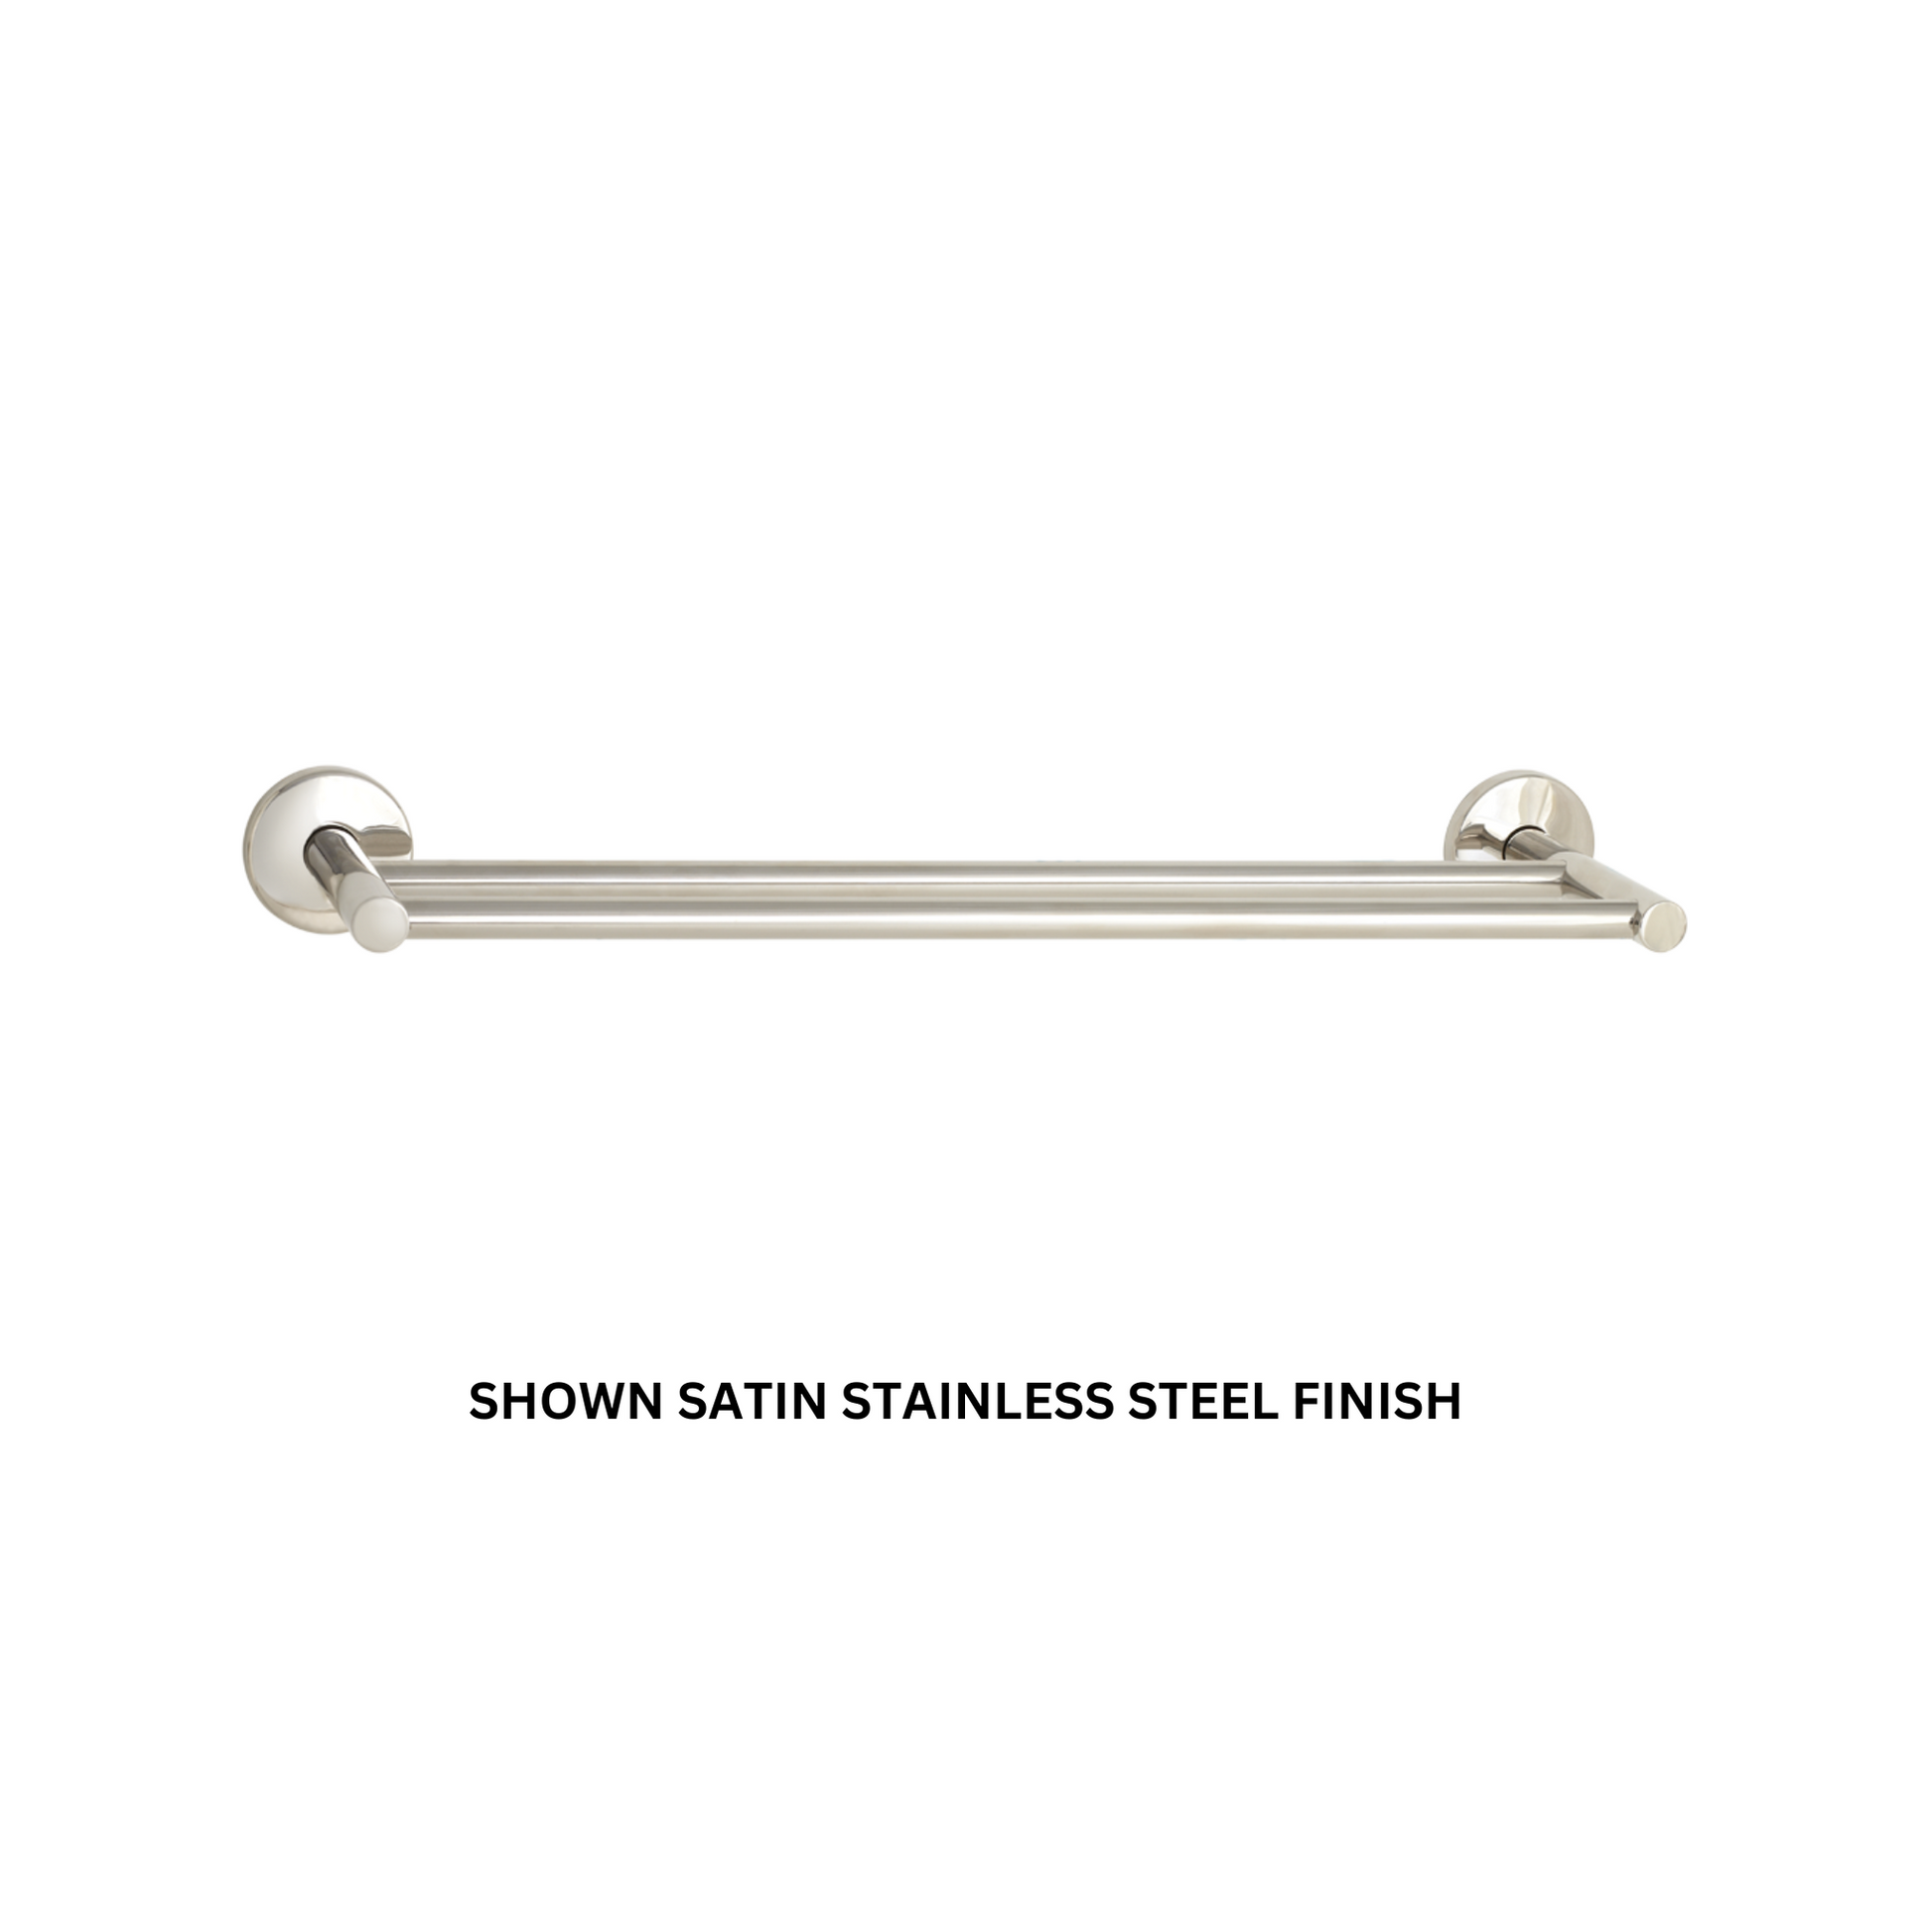 Seachrome Conorado Series 24" Almond Powder Coat Concealed Mounting Flange Double Towel Bar